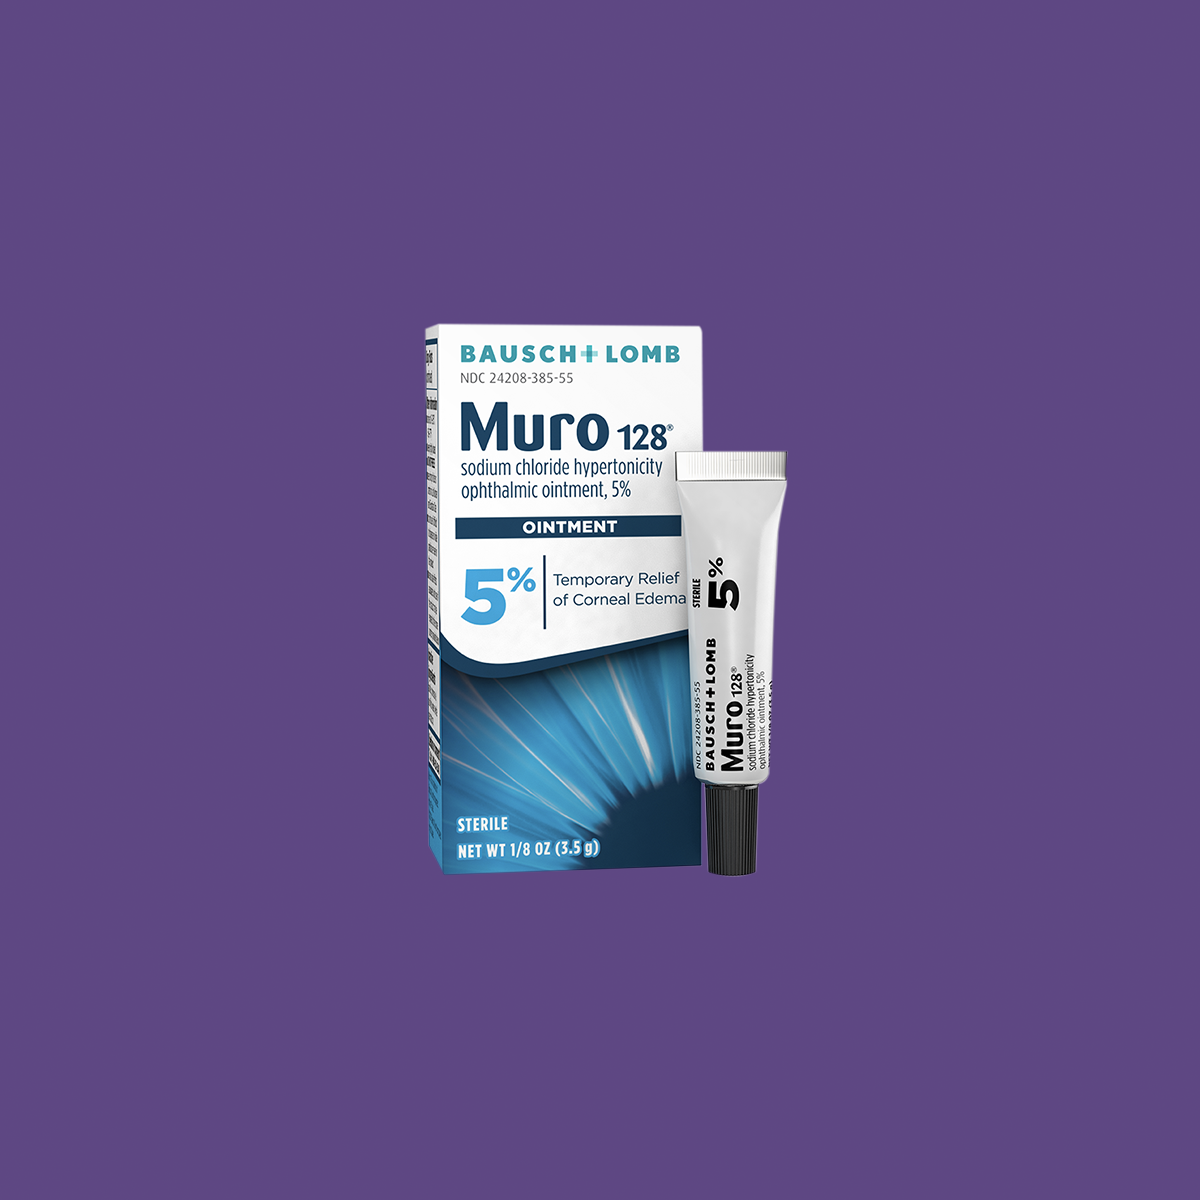 Muro 128 Sodium Chloride Ointment, Temporary Relief for Corneal Edema, 5% Ointment, 1/8 Fl Oz (3.5 g)